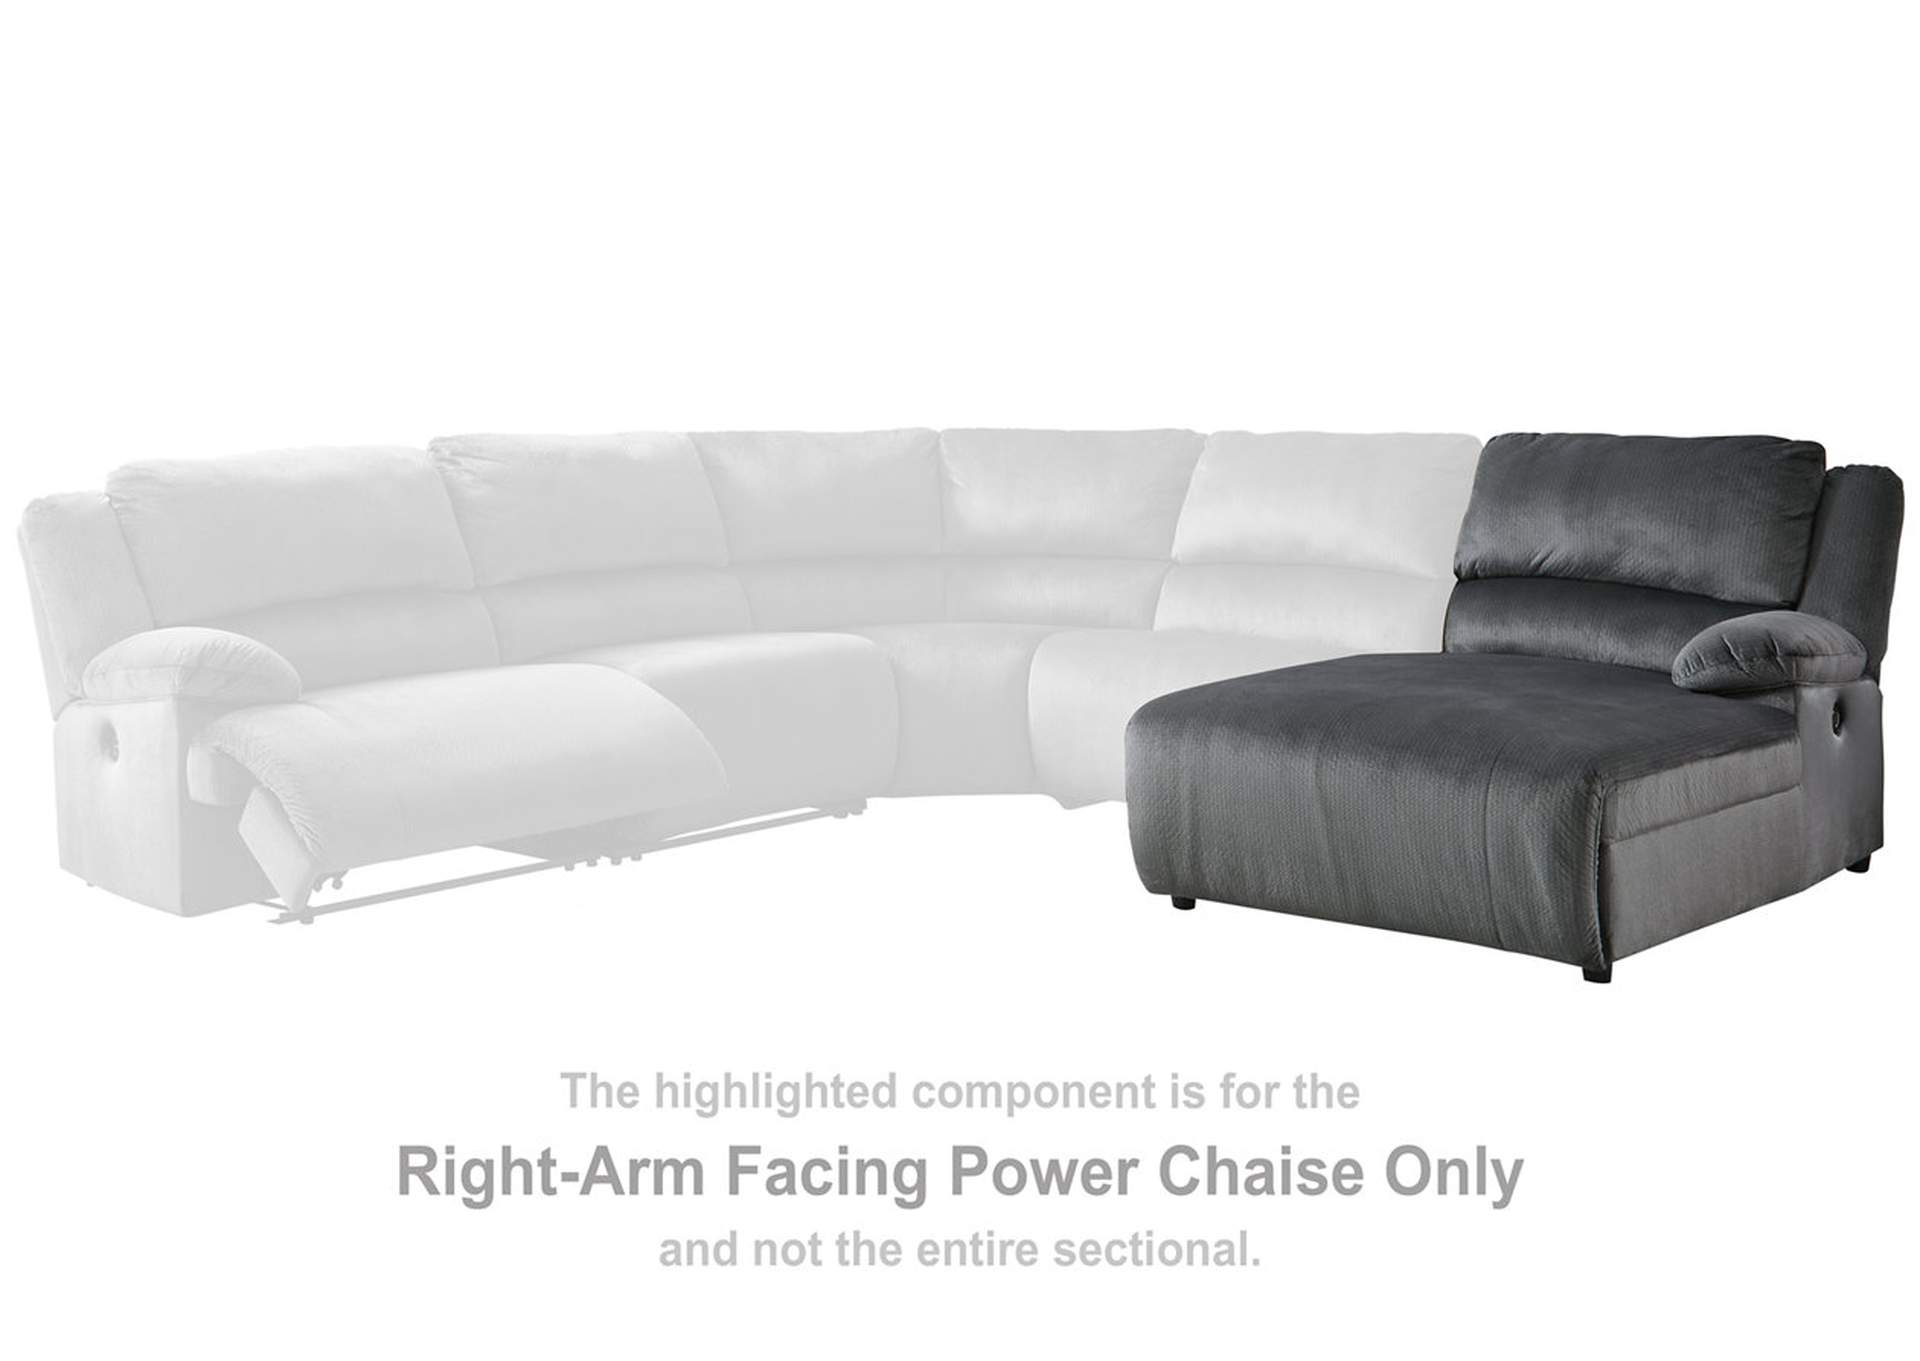 Clonmel 3-Piece Power Reclining Sectional with Chaise,Signature Design By Ashley